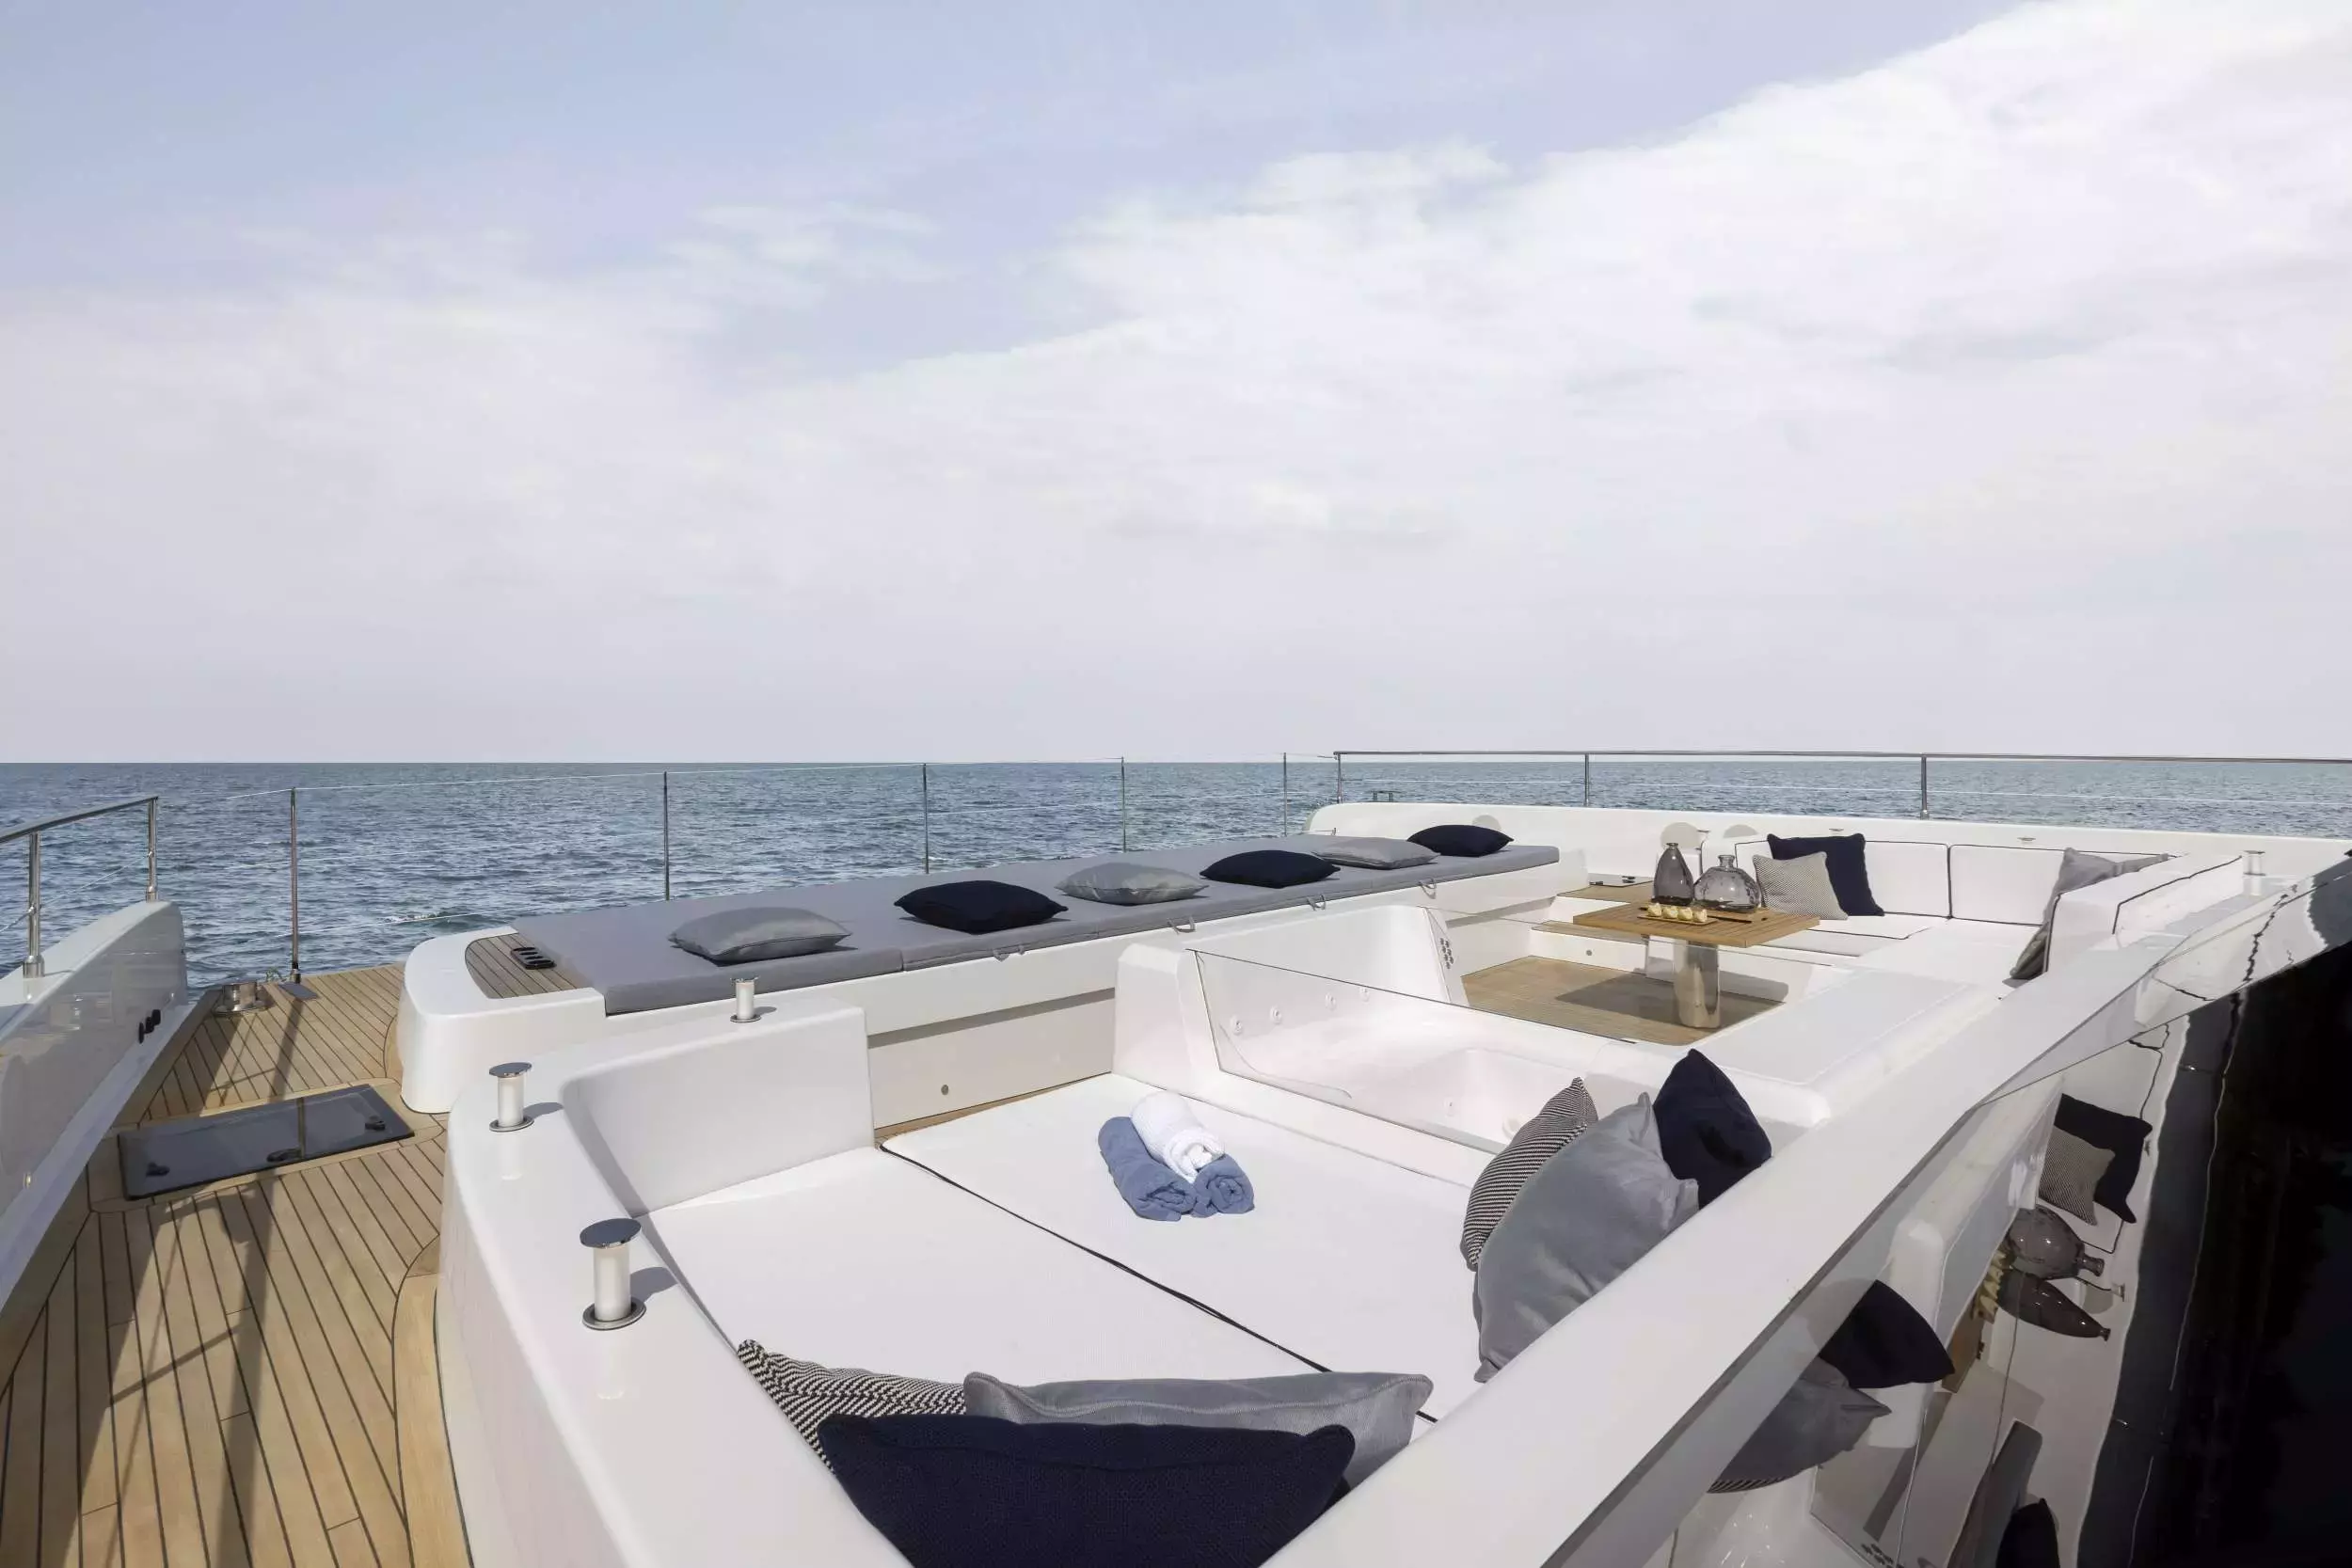 Pronto by Sunreef Yachts - Special Offer for a private Power Catamaran Rental in Harbour Island with a crew